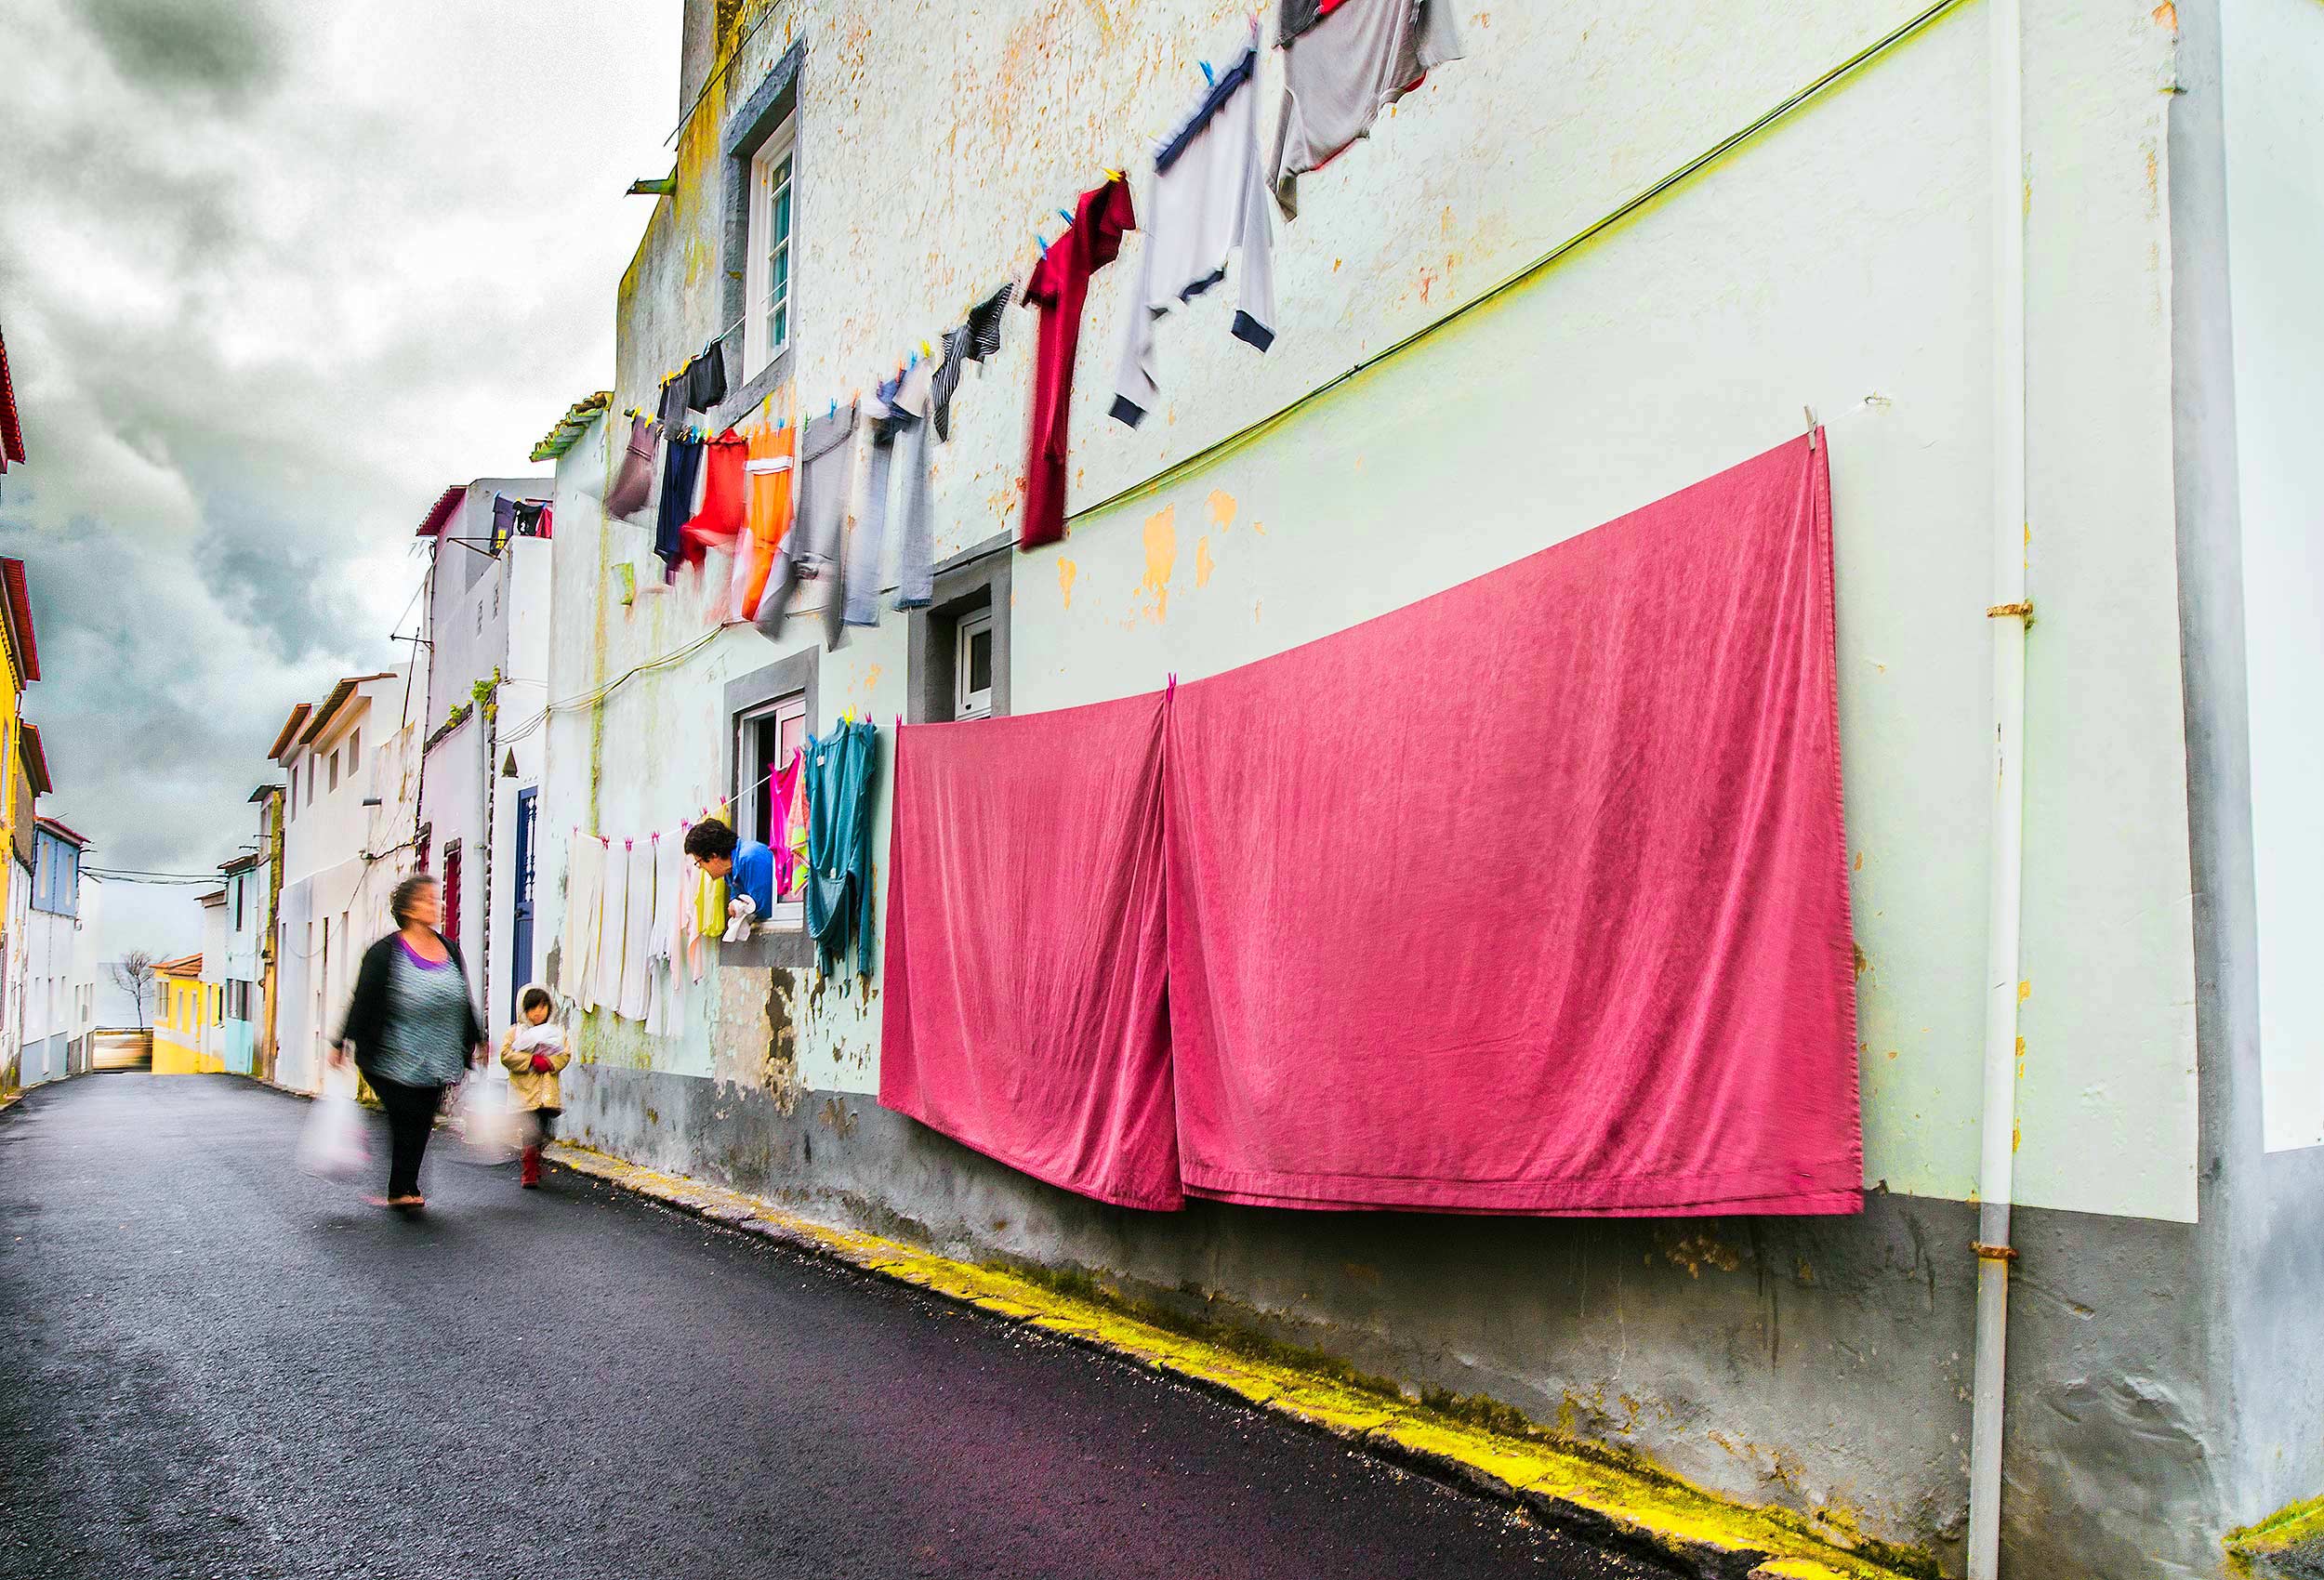 a-woman-hanging-laundry-talks-to-neighbors-on-the-street-in-ponta-delgada-azores-portugal